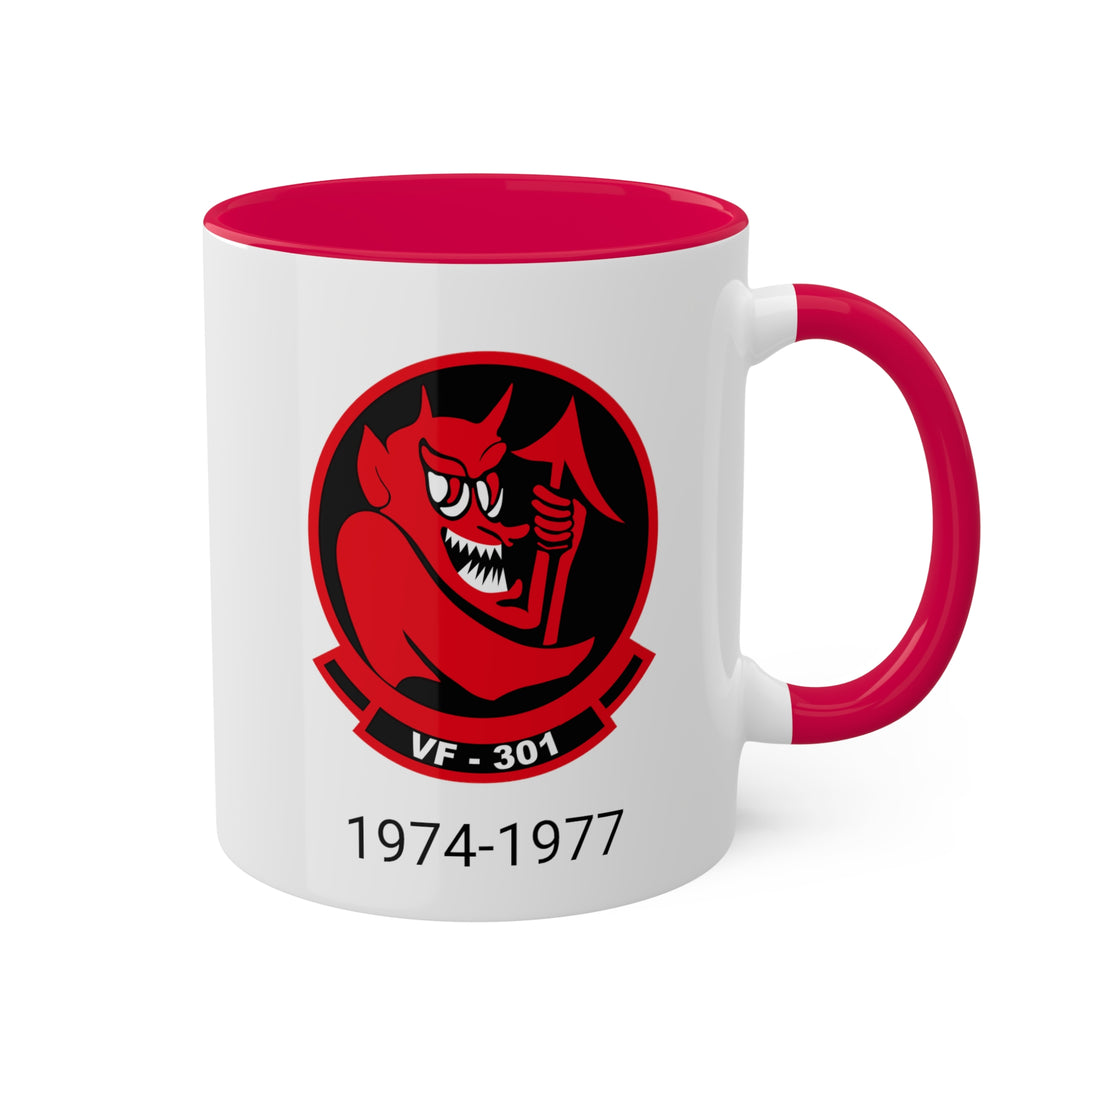 VF-301 "Devil's Desciples" Naval Flight Officer Mug Personalized with name and the Navy Reserve Fighter Squadron Logo